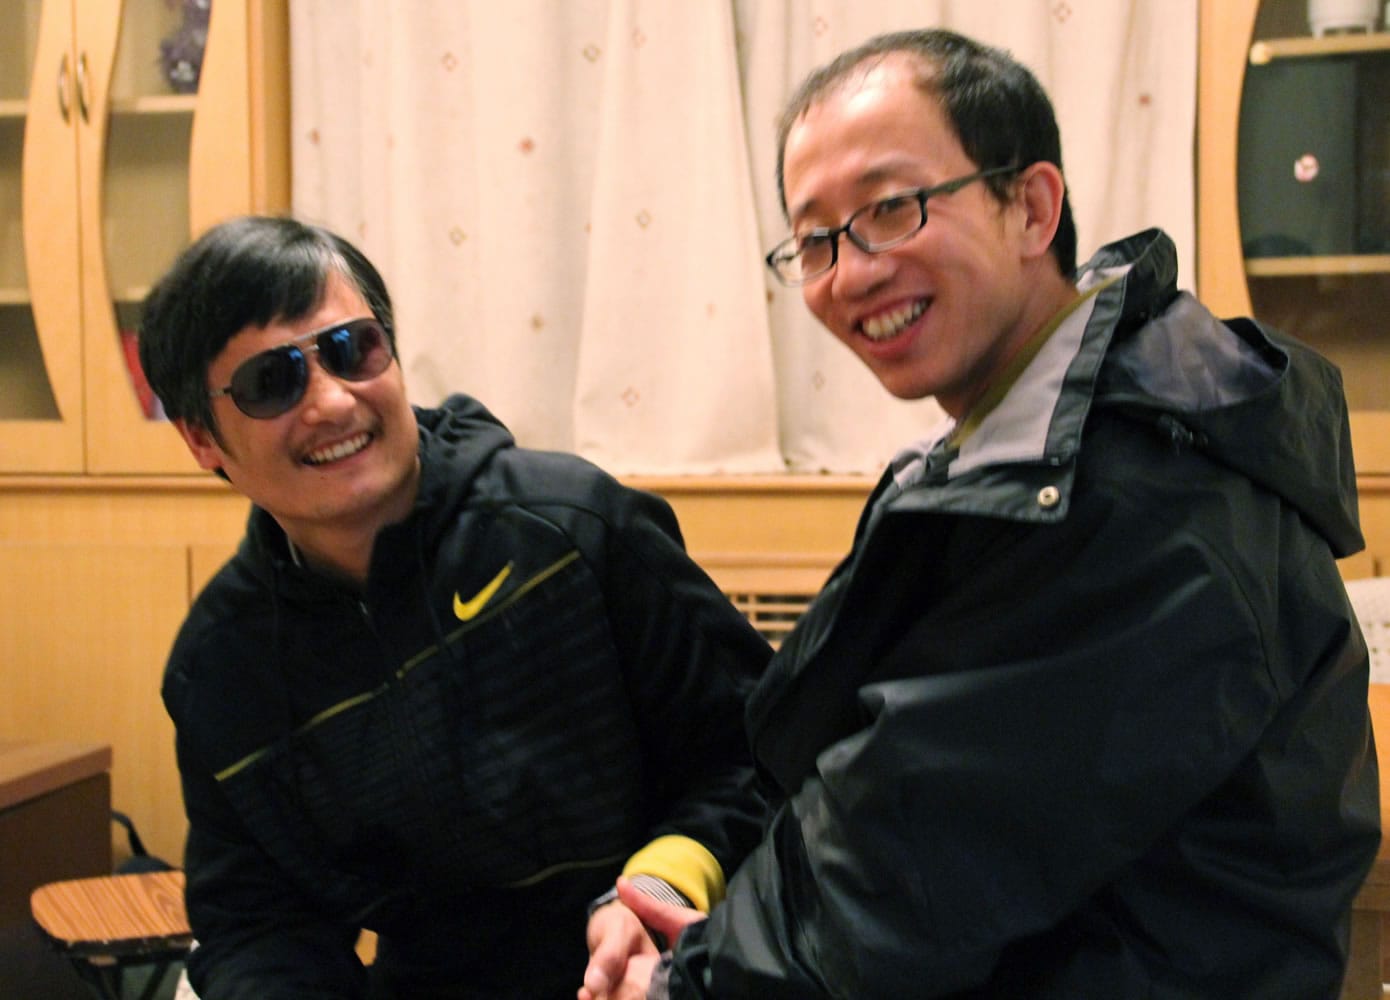 In this photo taken in late April, 2012, and provided by Hu Jia, blind Chinese legal activist Chen Guangcheng, left, meets with Hu at an undisclosed location. Chen, an inspirational figure in China's rights movement, slipped away from his well-guarded rural village on Sunday night, April 22, 2012, and made it to a secret location in Beijing on Friday, April 27, setting off a frantic police search for him and those who helped him, activists said.